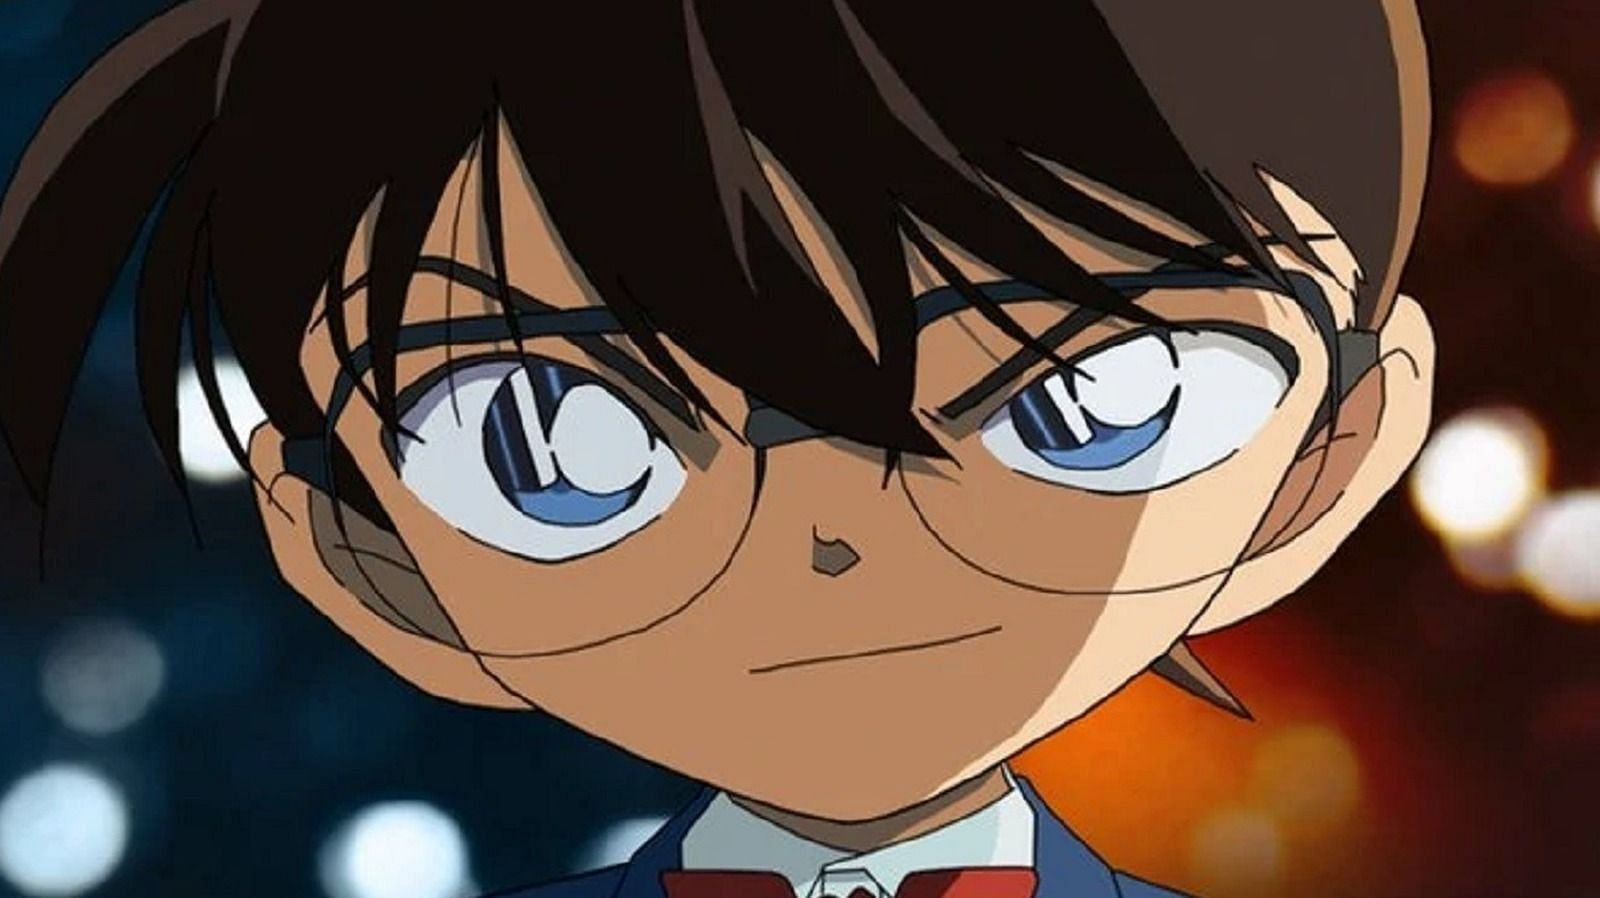 Conan Edogawa, one of the youngest shonen male protagonists (Image via TMS Entertainemnt)